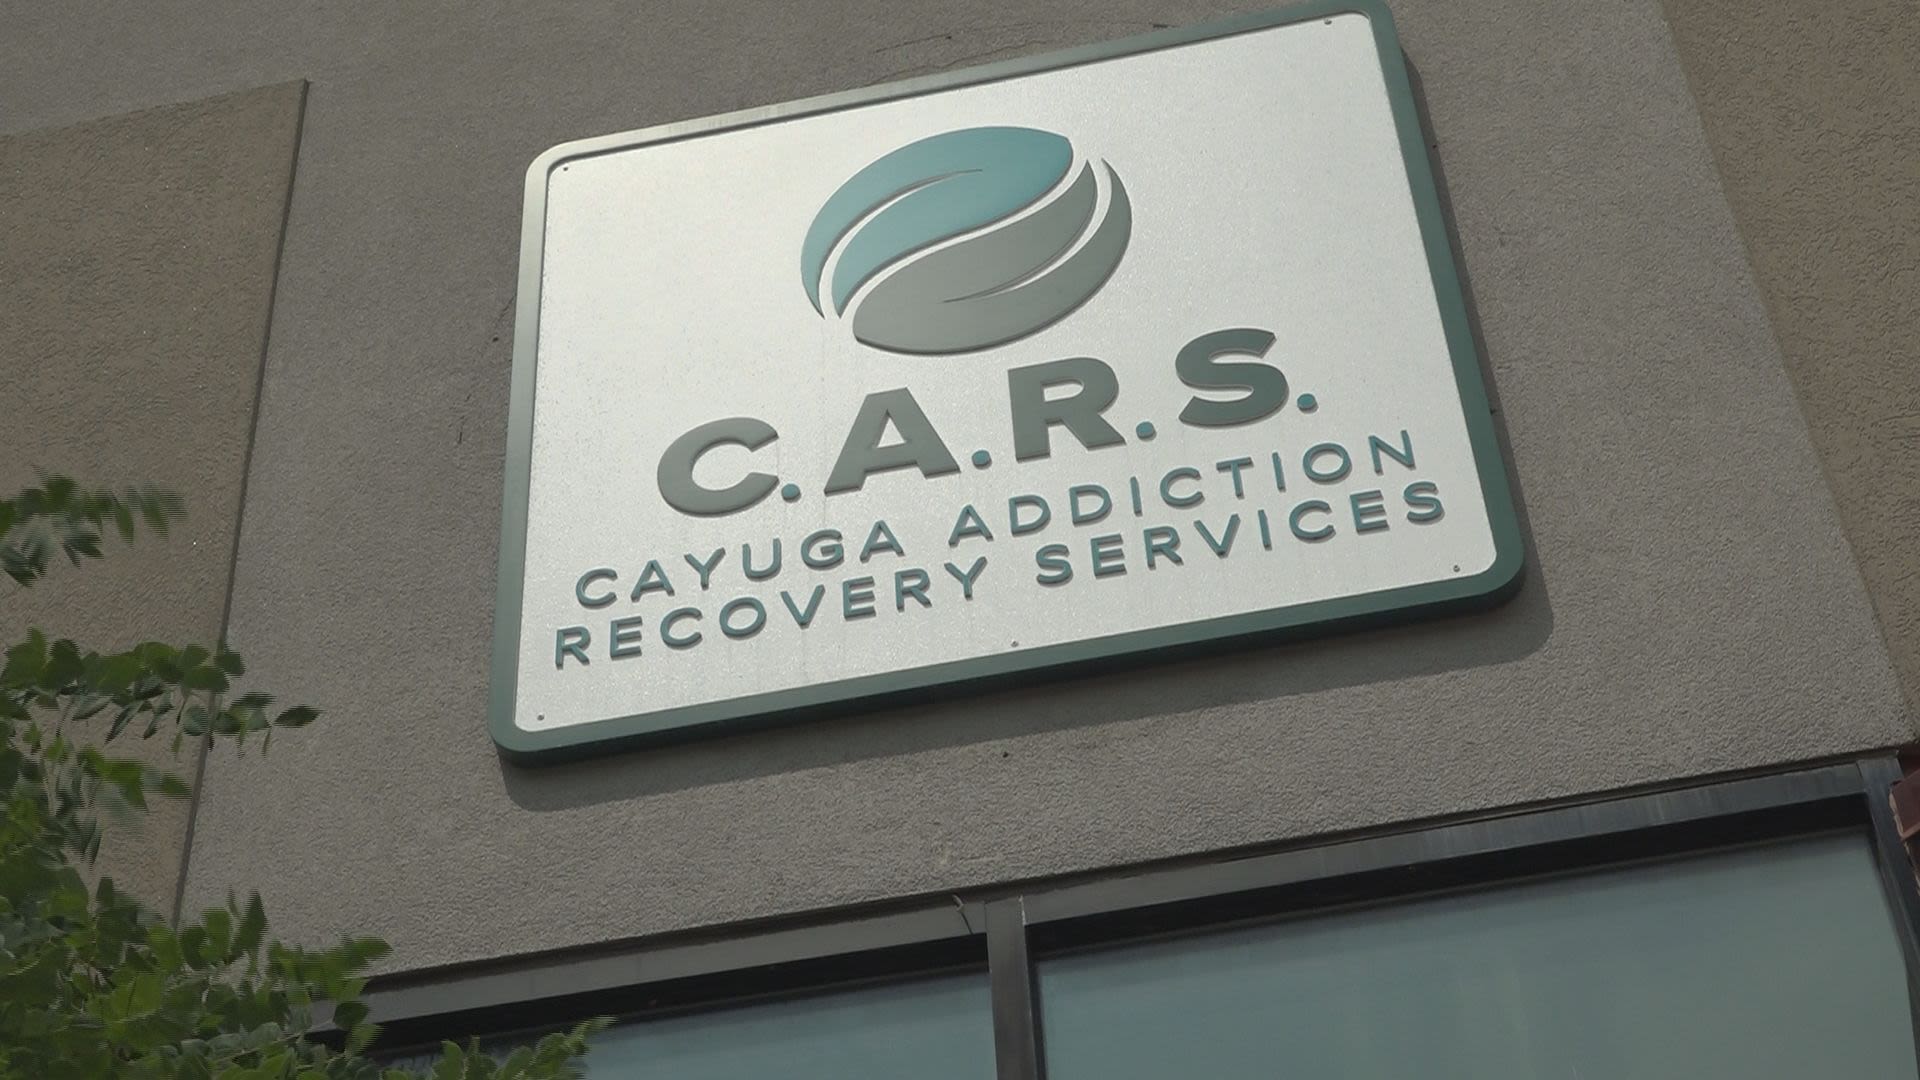 Cayuga Addiction Recovery Services receives $25,000 in state funds